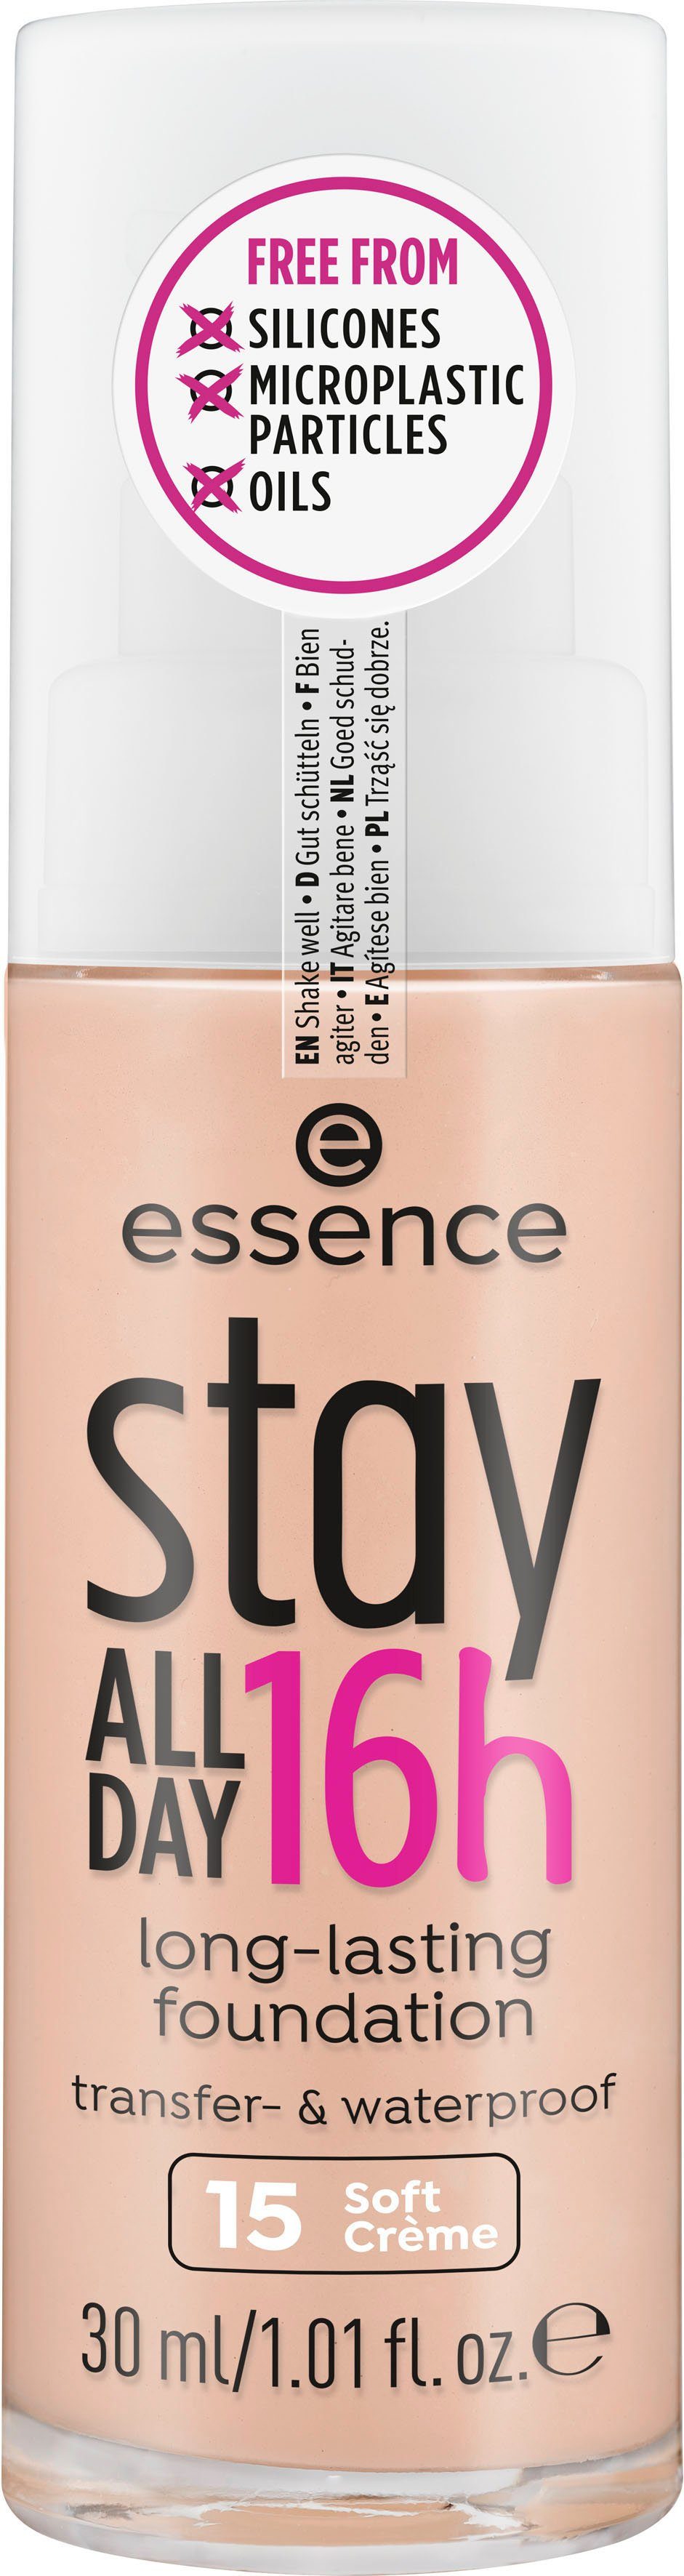 Essence Foundation long-lasting, ALL 3-tlg. 16h Creme stay Soft DAY